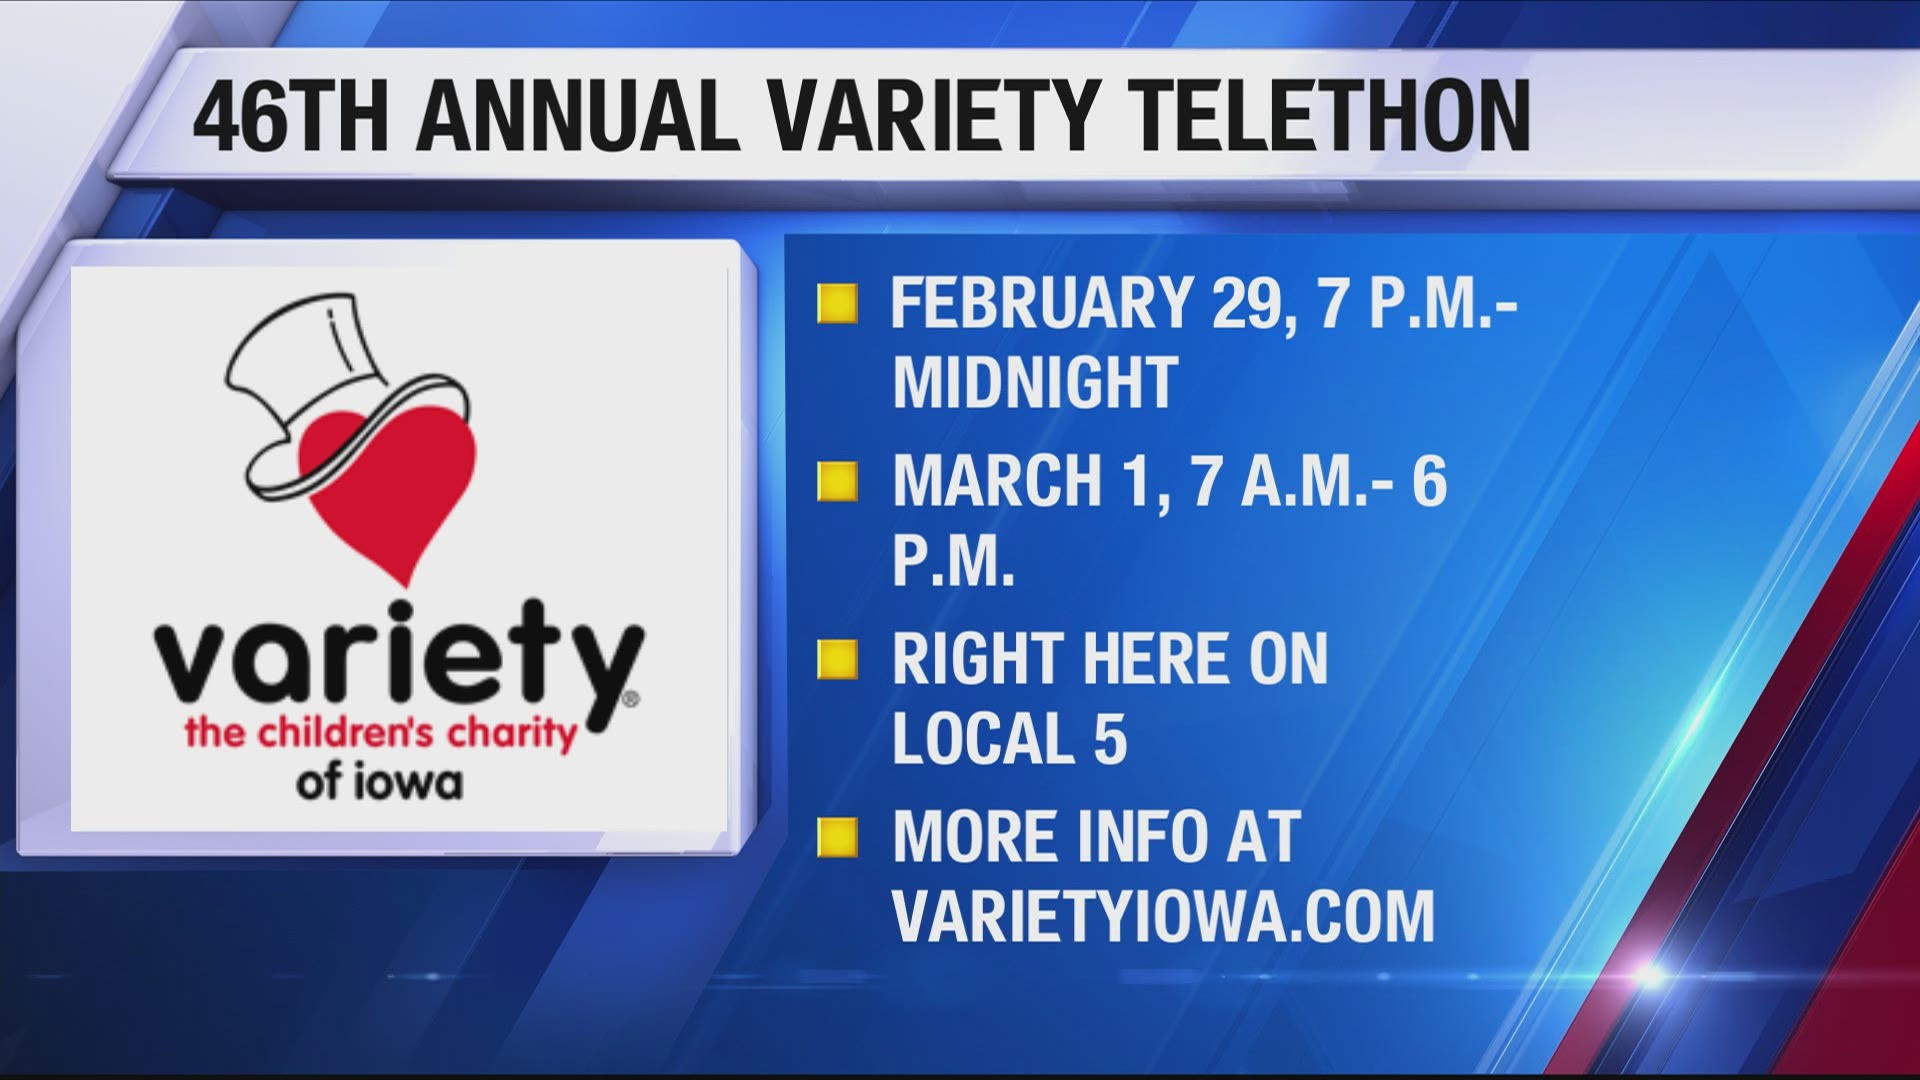 The 46th Annual Variety Telethon will take place on February 29 and March 1 right here on Local 5